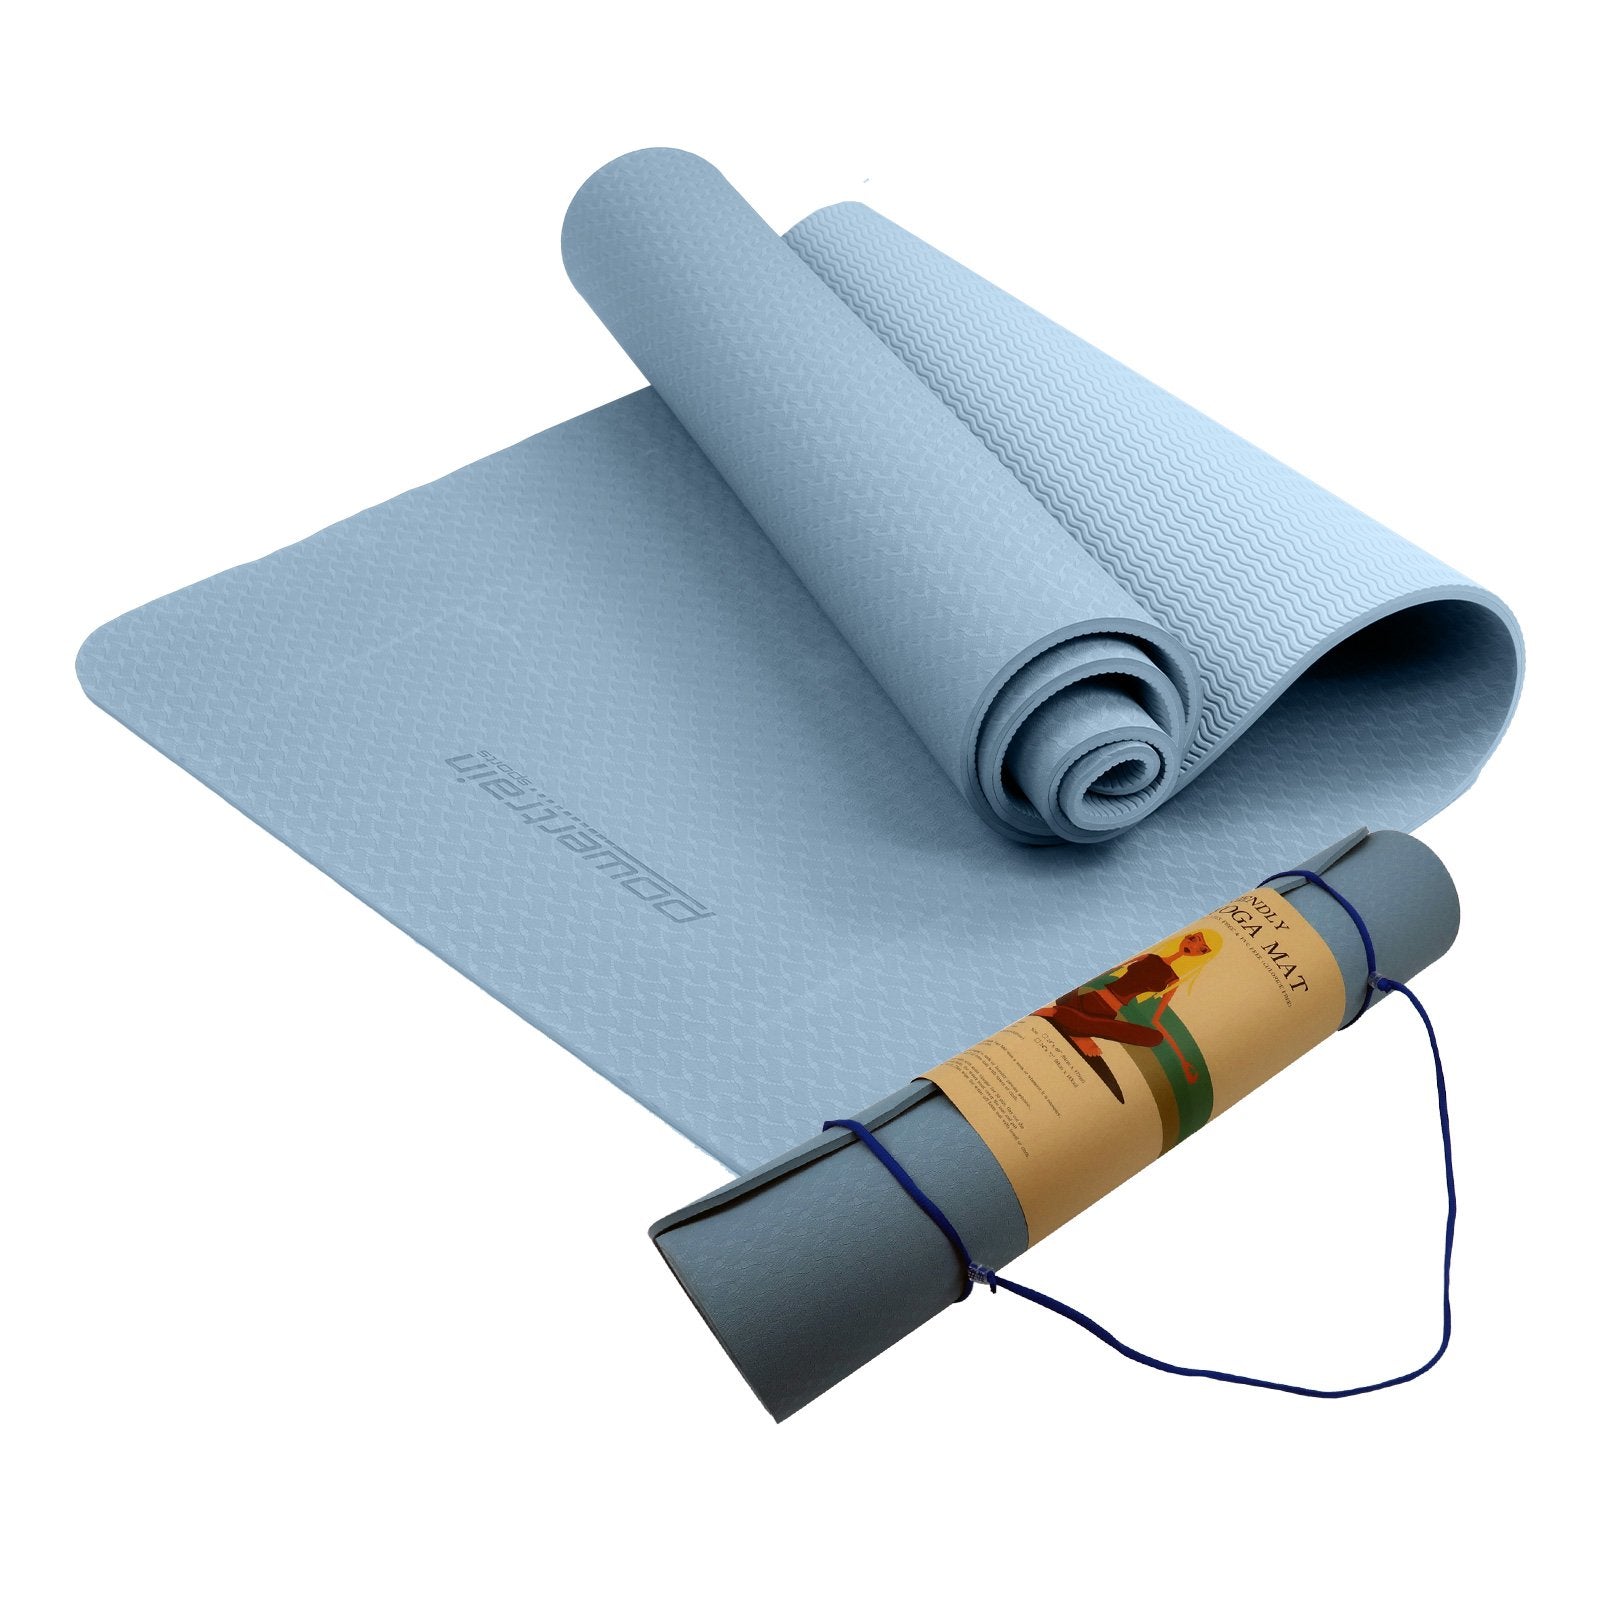 Eco-friendly Dual Layer 6mm Yoga Mat | Sky Blue | Non-slip Surface And Carry Strap For Ultimate Comfort And Portability